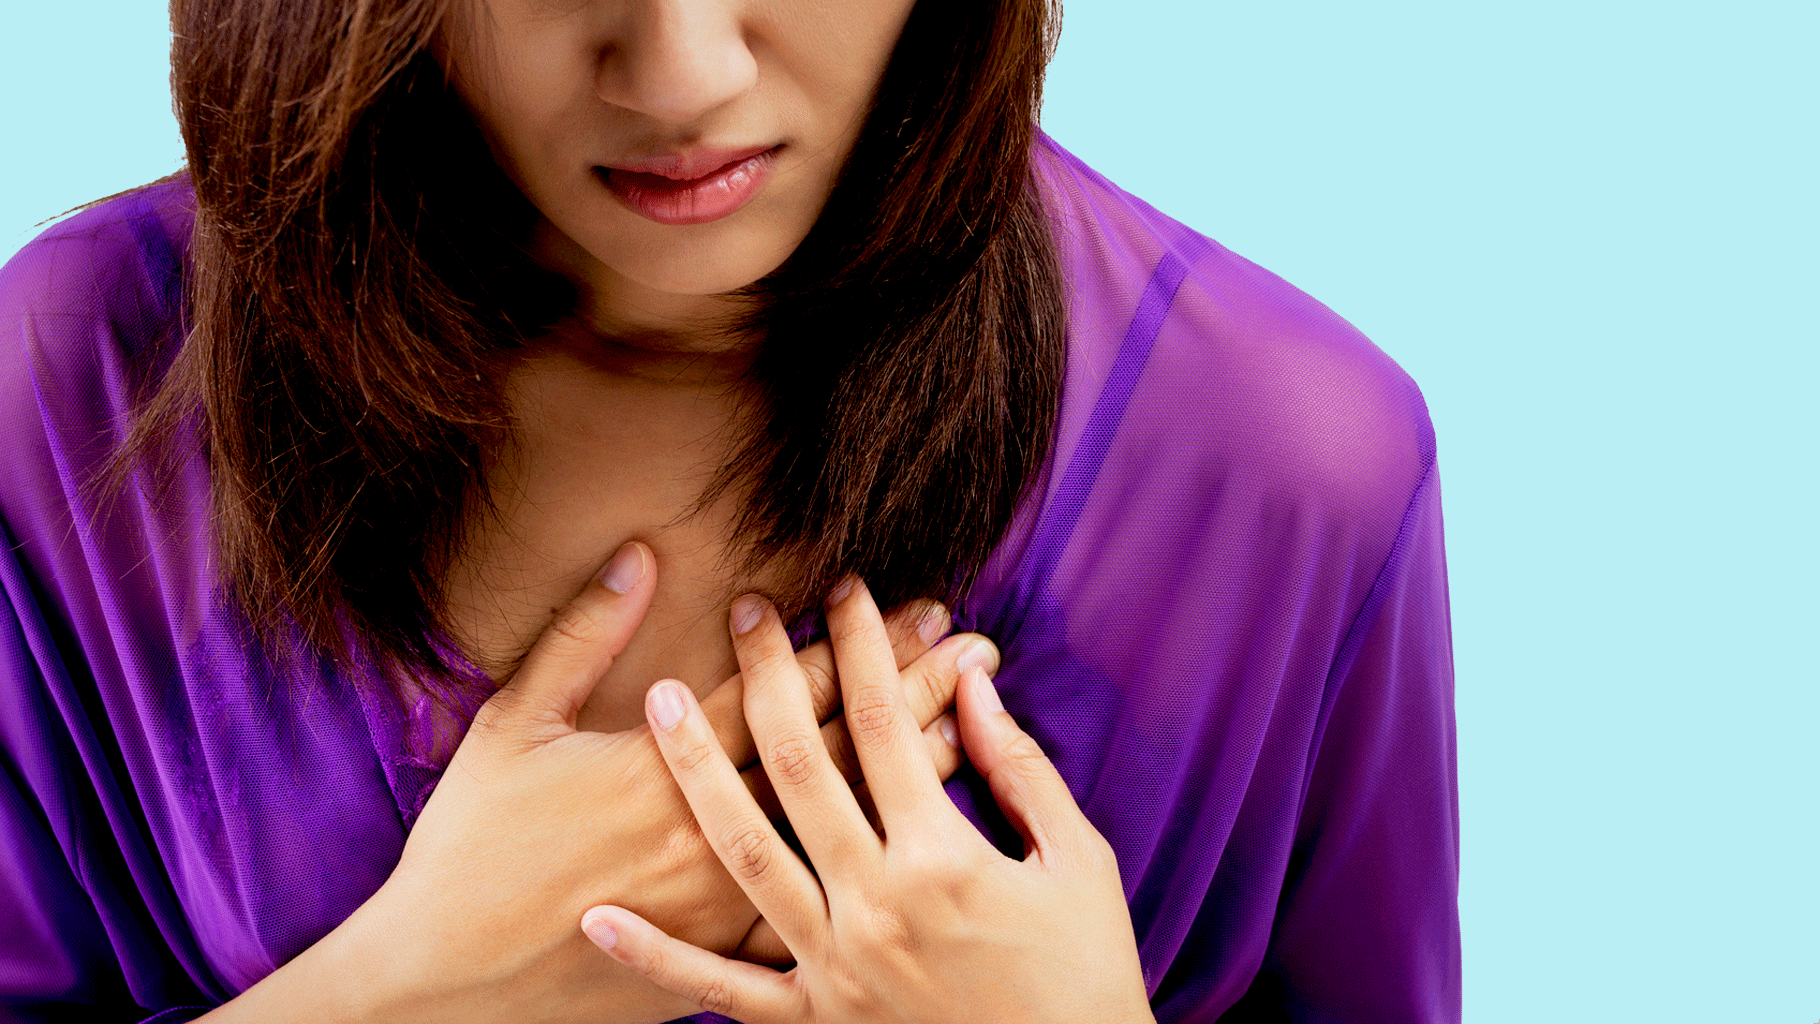 A heart attack occurs, when the blood flow that brings oxygen to the heart muscle, is severely reduced or cut off completely.